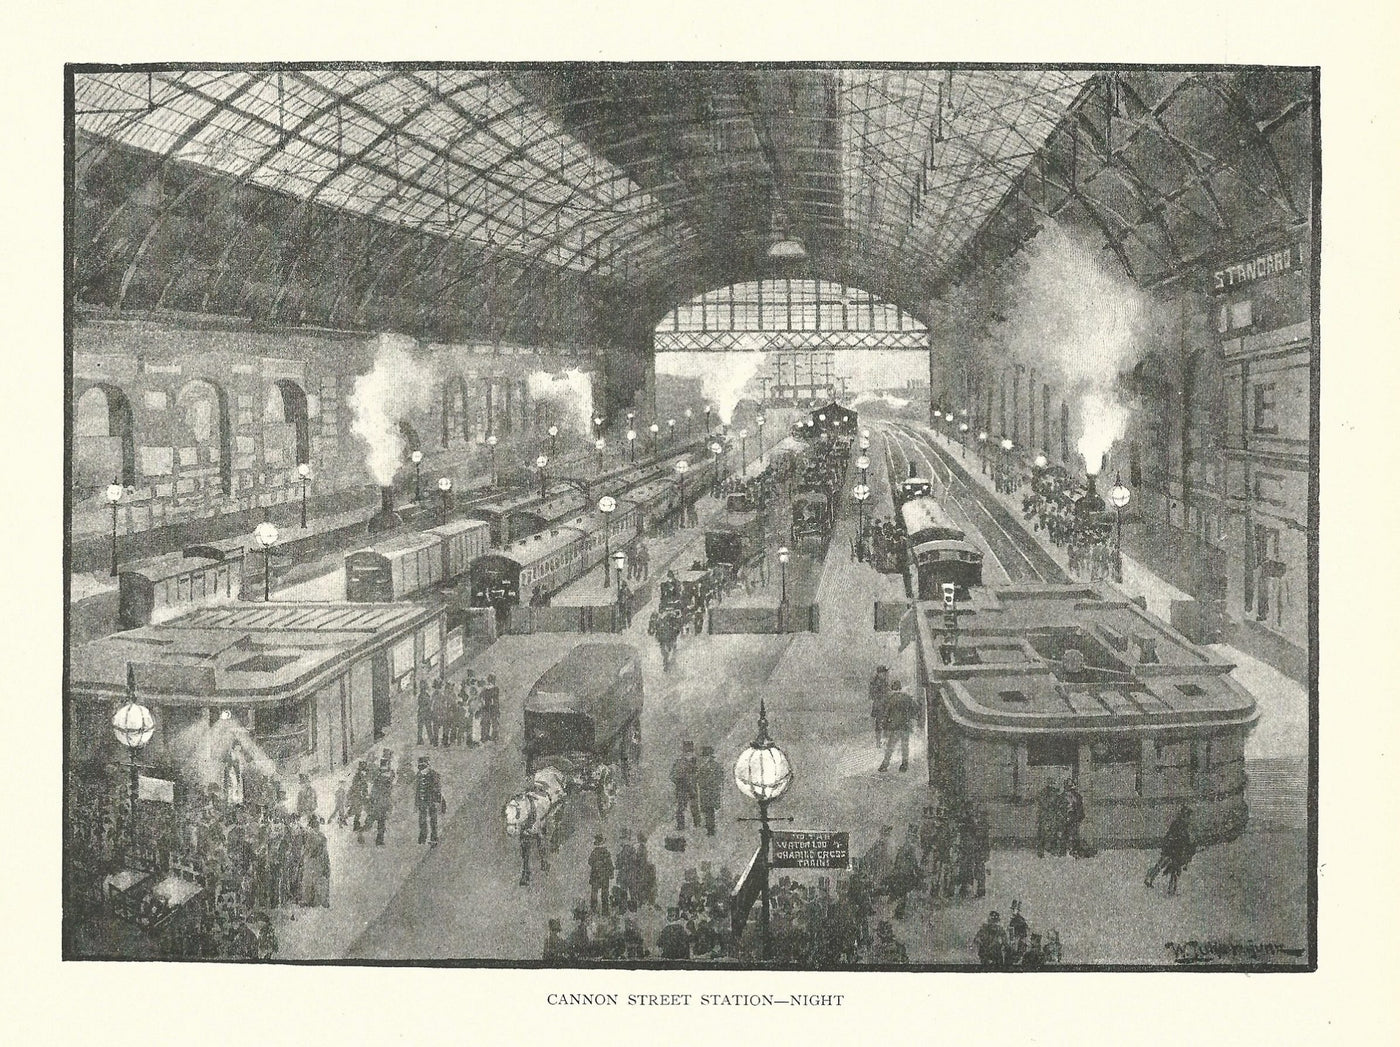 Cannon Street Station antique print published 1890